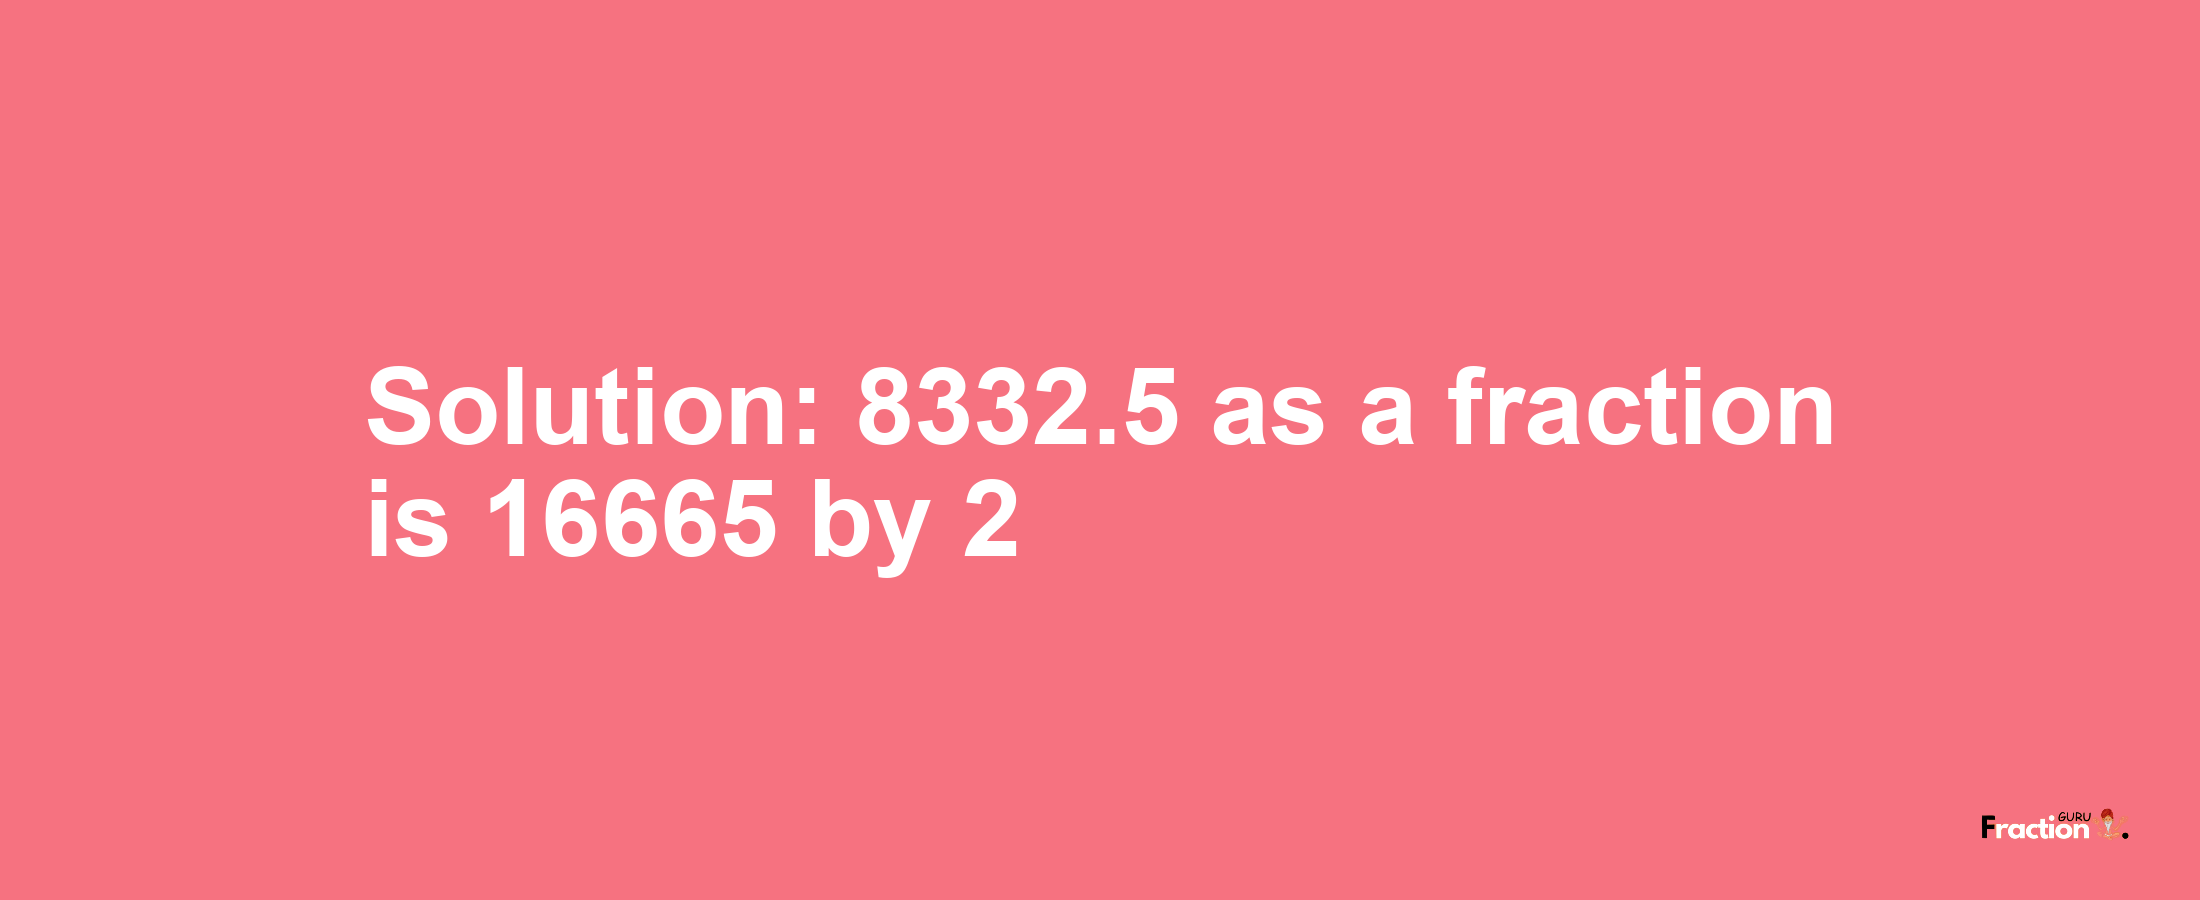 Solution:8332.5 as a fraction is 16665/2